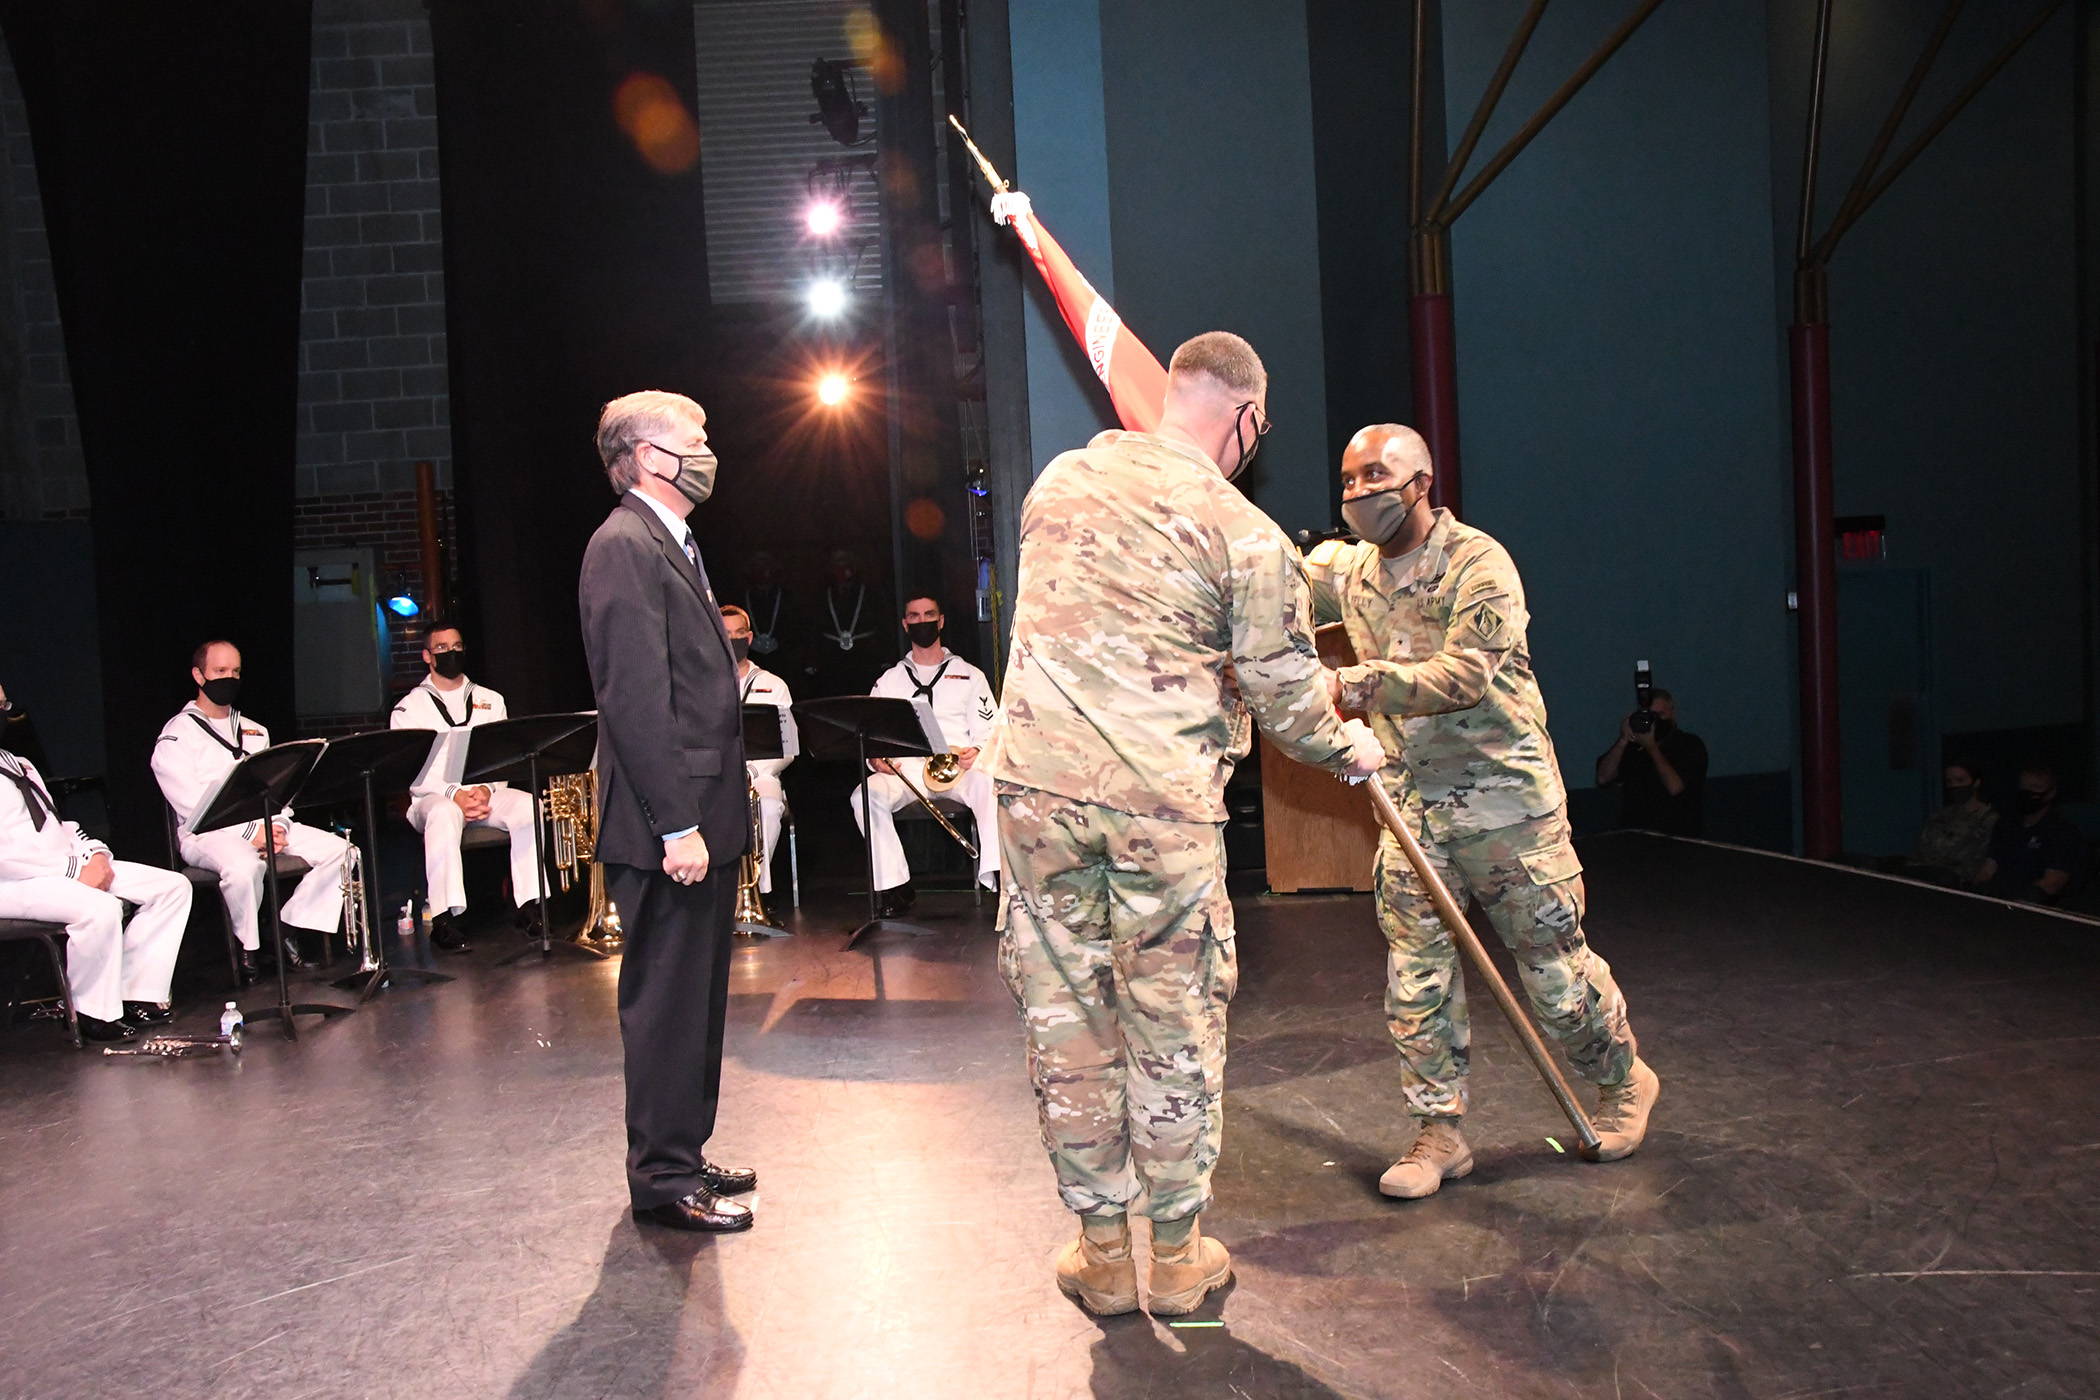 Brigadier General Jason E. Kelly, Commanding General, U.S. Army Corps of Engineers South Atlantic Division, (Right) passes the Jacksonville District flag to Col. James L. Booth (Left) as he took command of the Jacksonville District during a change of command ceremony Sept 9, 2021 at the at the Terry Theater, Times Union Center, Jacksonville. (USACE photo by Mark Rankin)